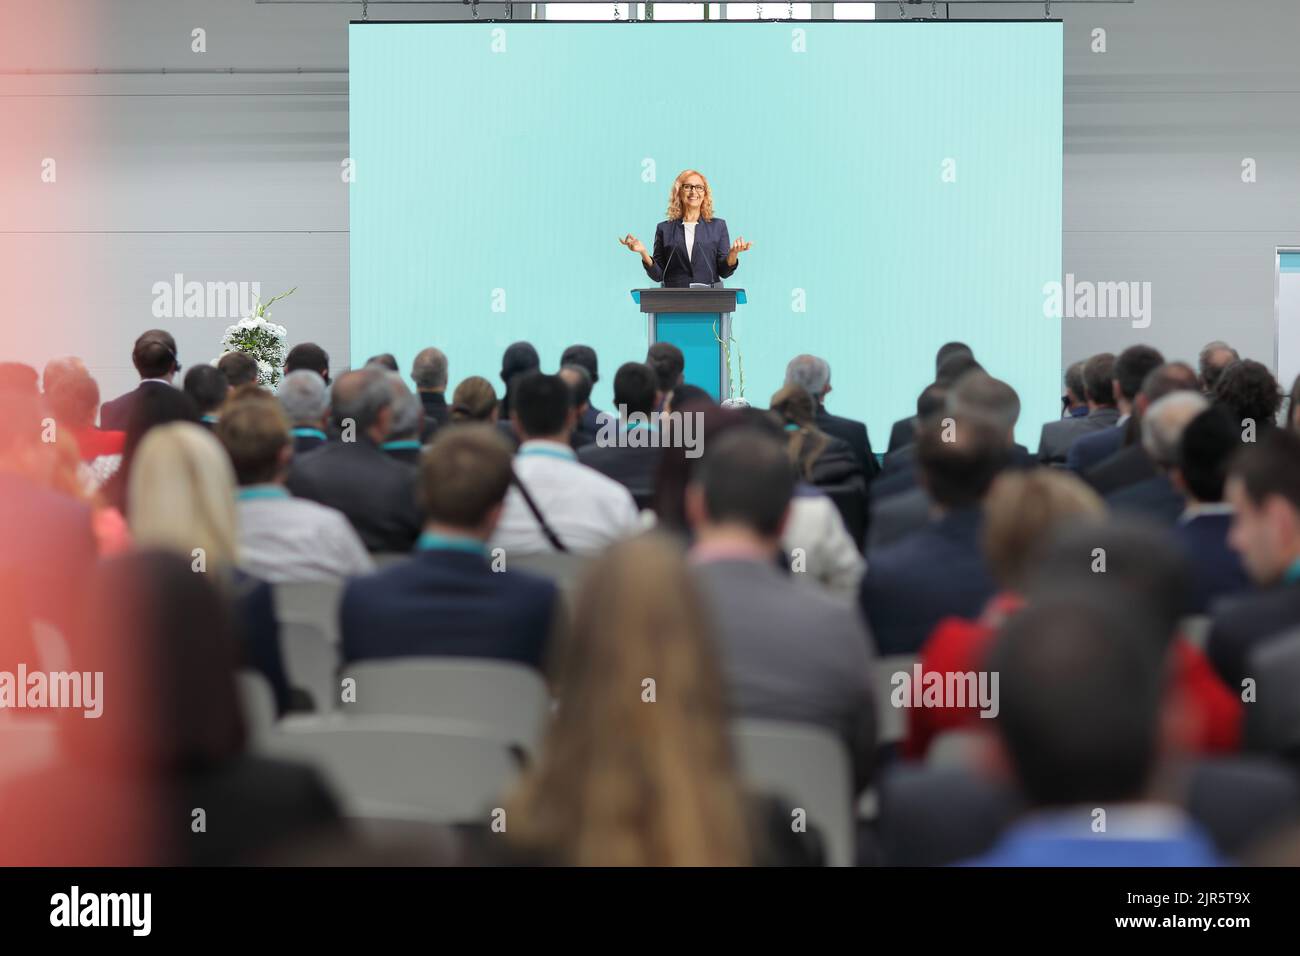 Woman giving a speech on a podium and people sitting in the audience at a business conference Stock Photo